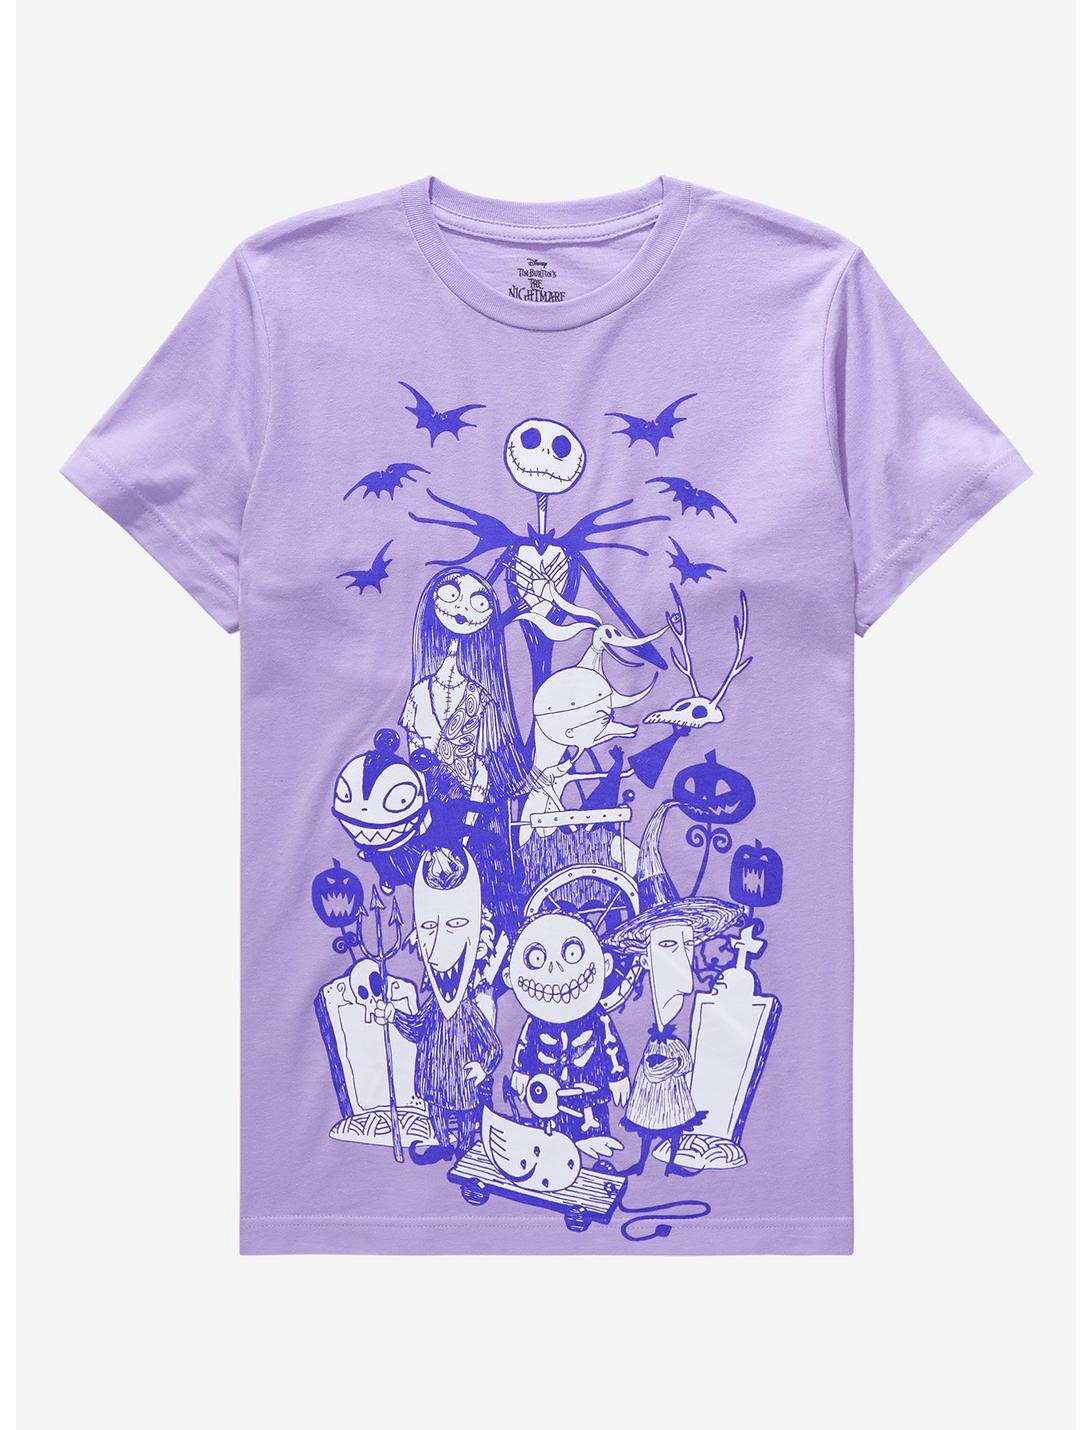 The Nightmare Before Christmas Lavender Group Boyfriend Fit Girls T-Shirt, MULTI, hi-res